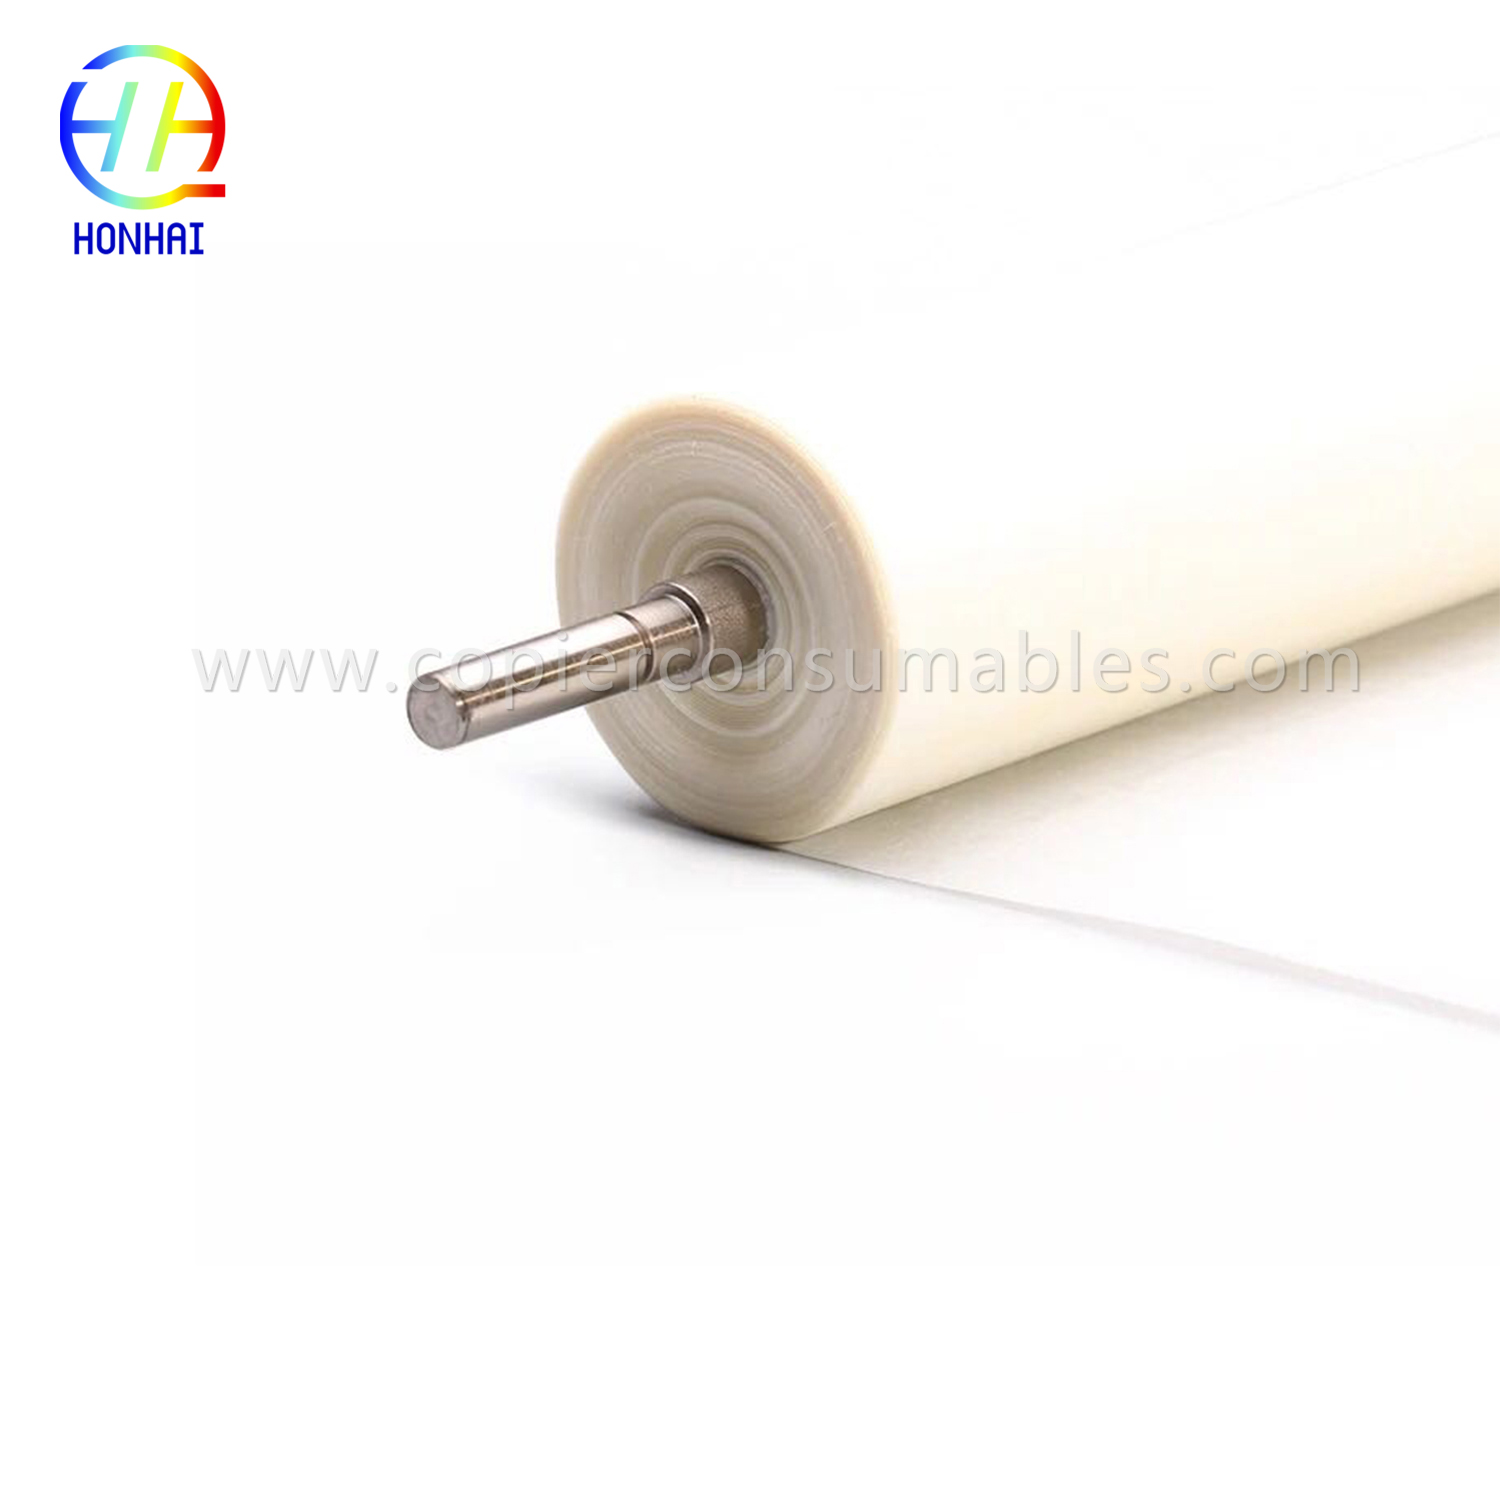 Fuser Cleaning Web Roller for Xerox 4110 4112 4127 4590 4595 (8R13042 8R13085 8R13000)